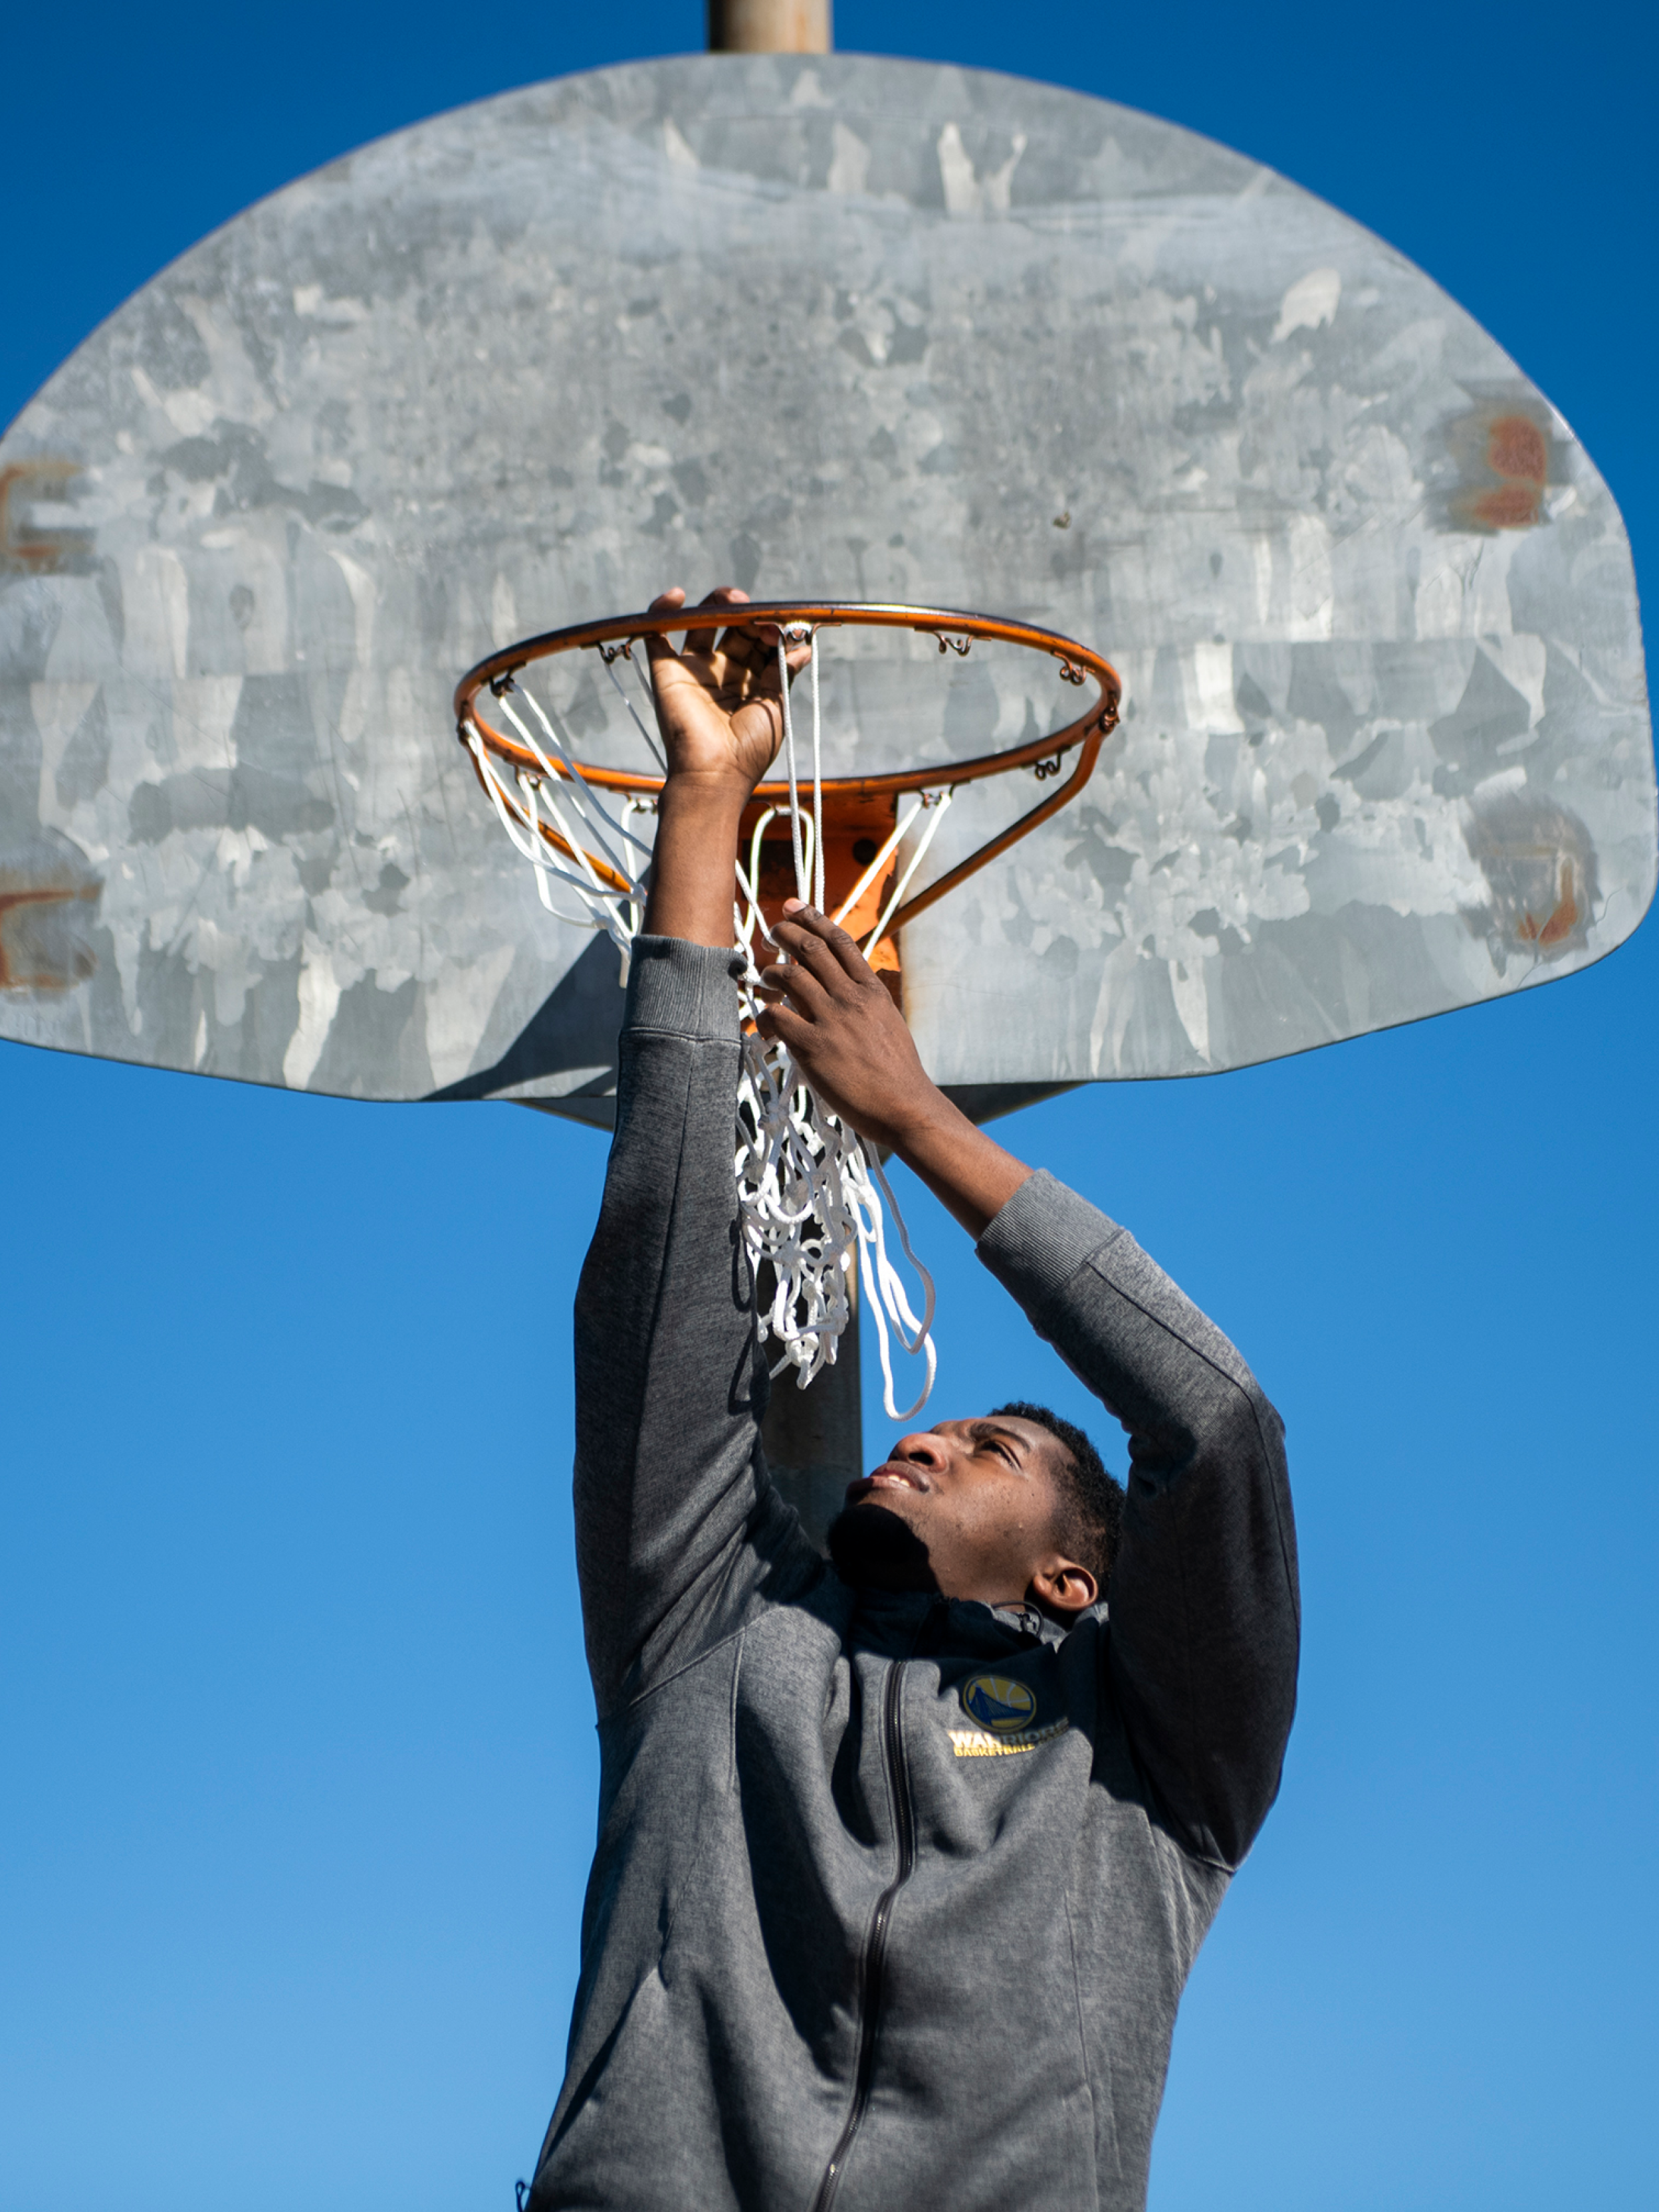 A Black boy with a deep skin tone wears a sweatshirt and holds onto the rim of a basketball net, looking upward. The sky behind is a deep blue.